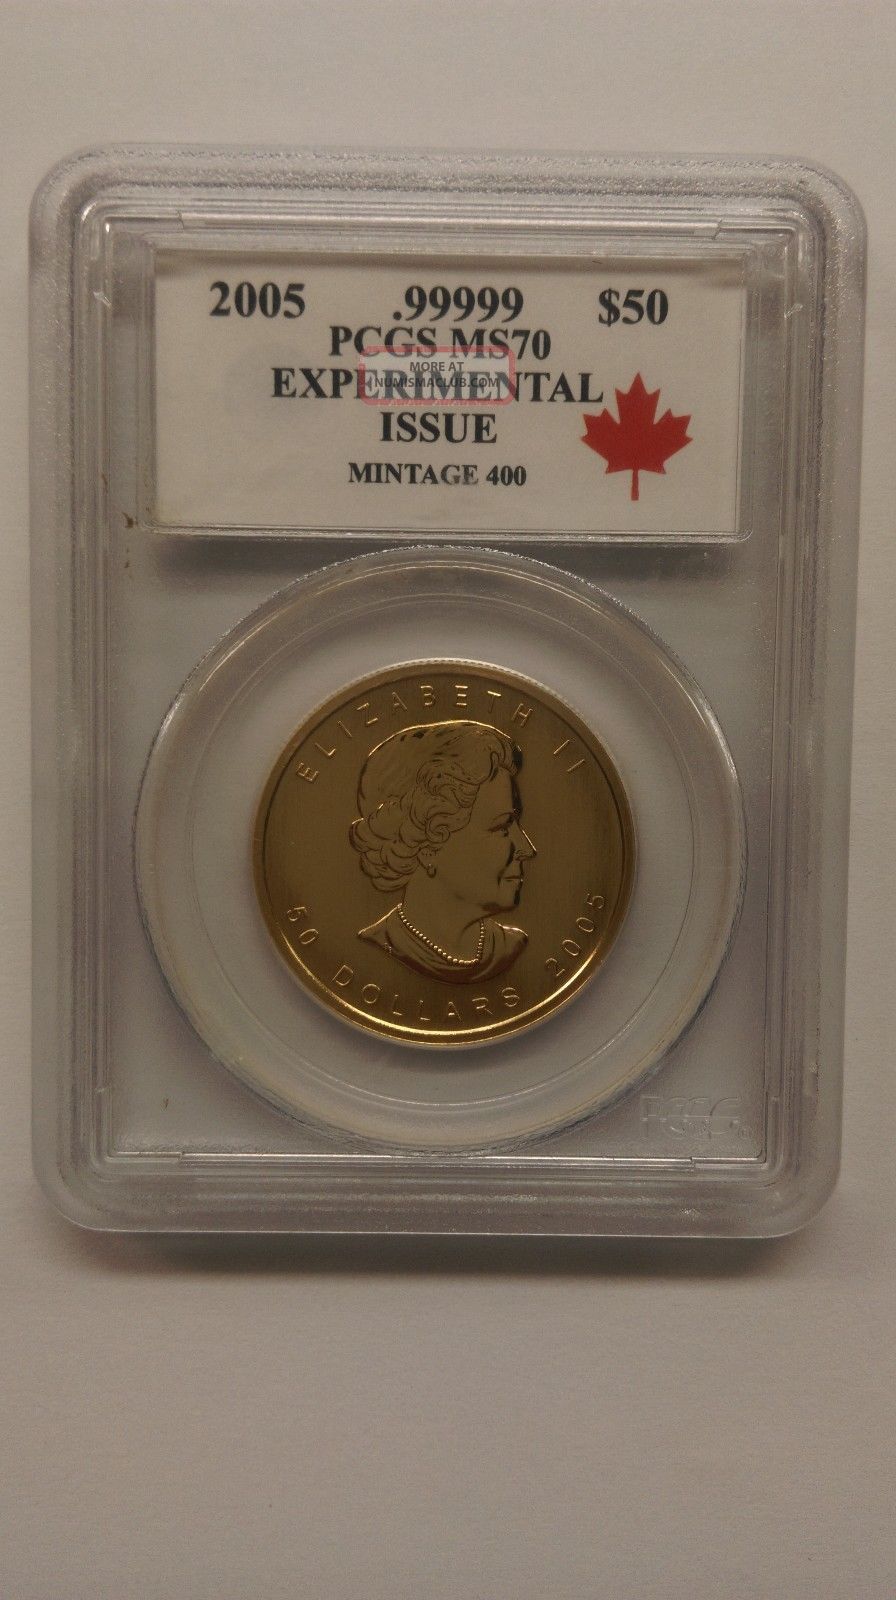 2005 Canada 1 Oz. Gold Maple Leaf Five Nines Experimental Issue Pcgs Ms70